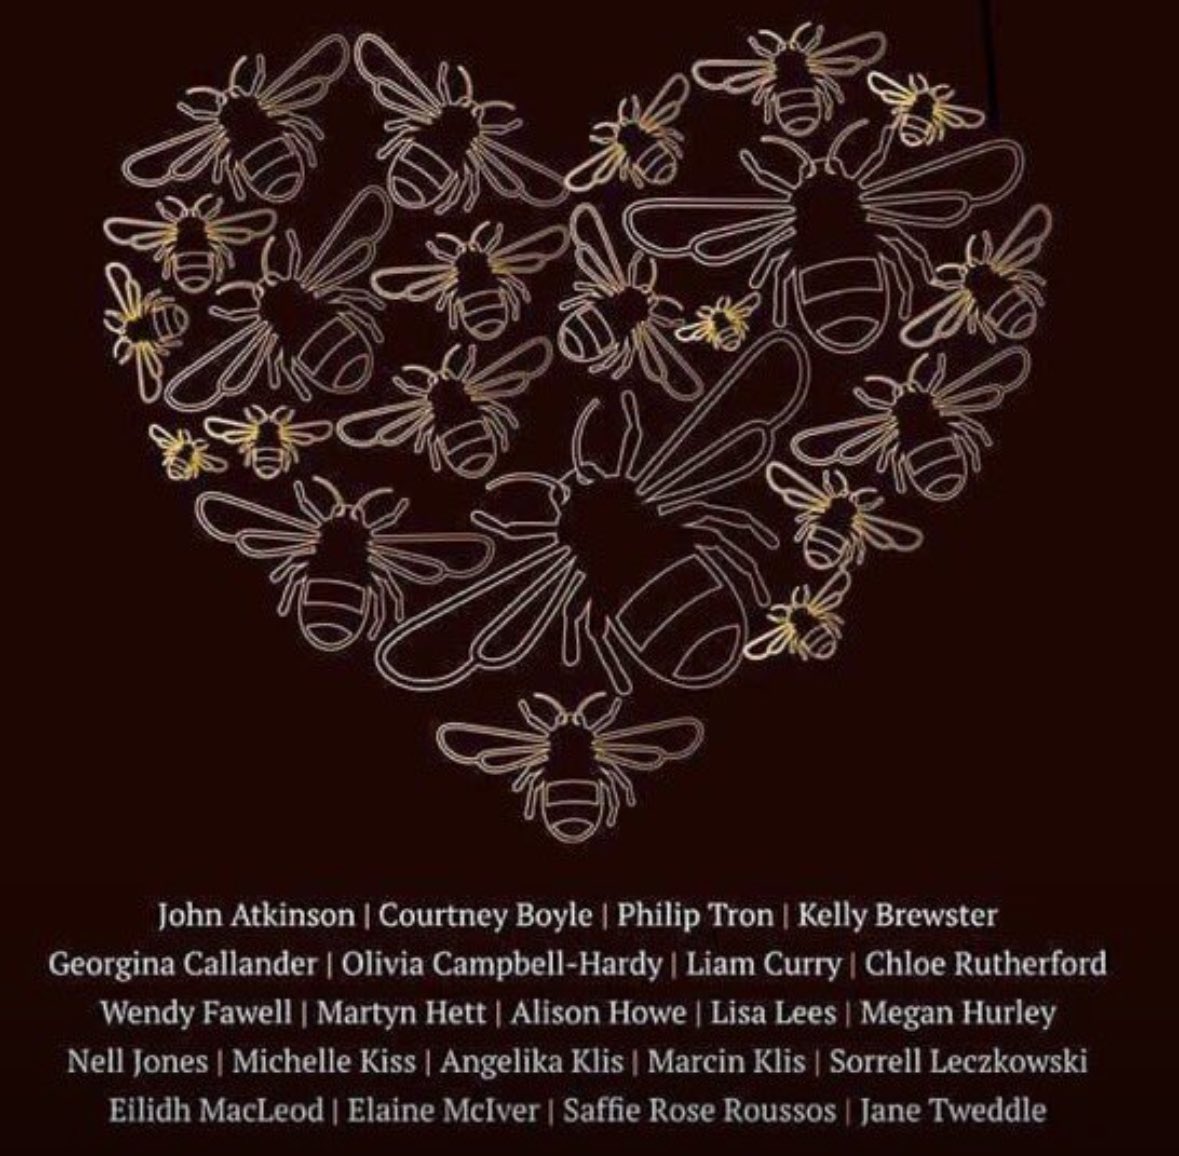 7 years ago today, 22 people went to a concert and never returned home. Their lives will never be forgotten.